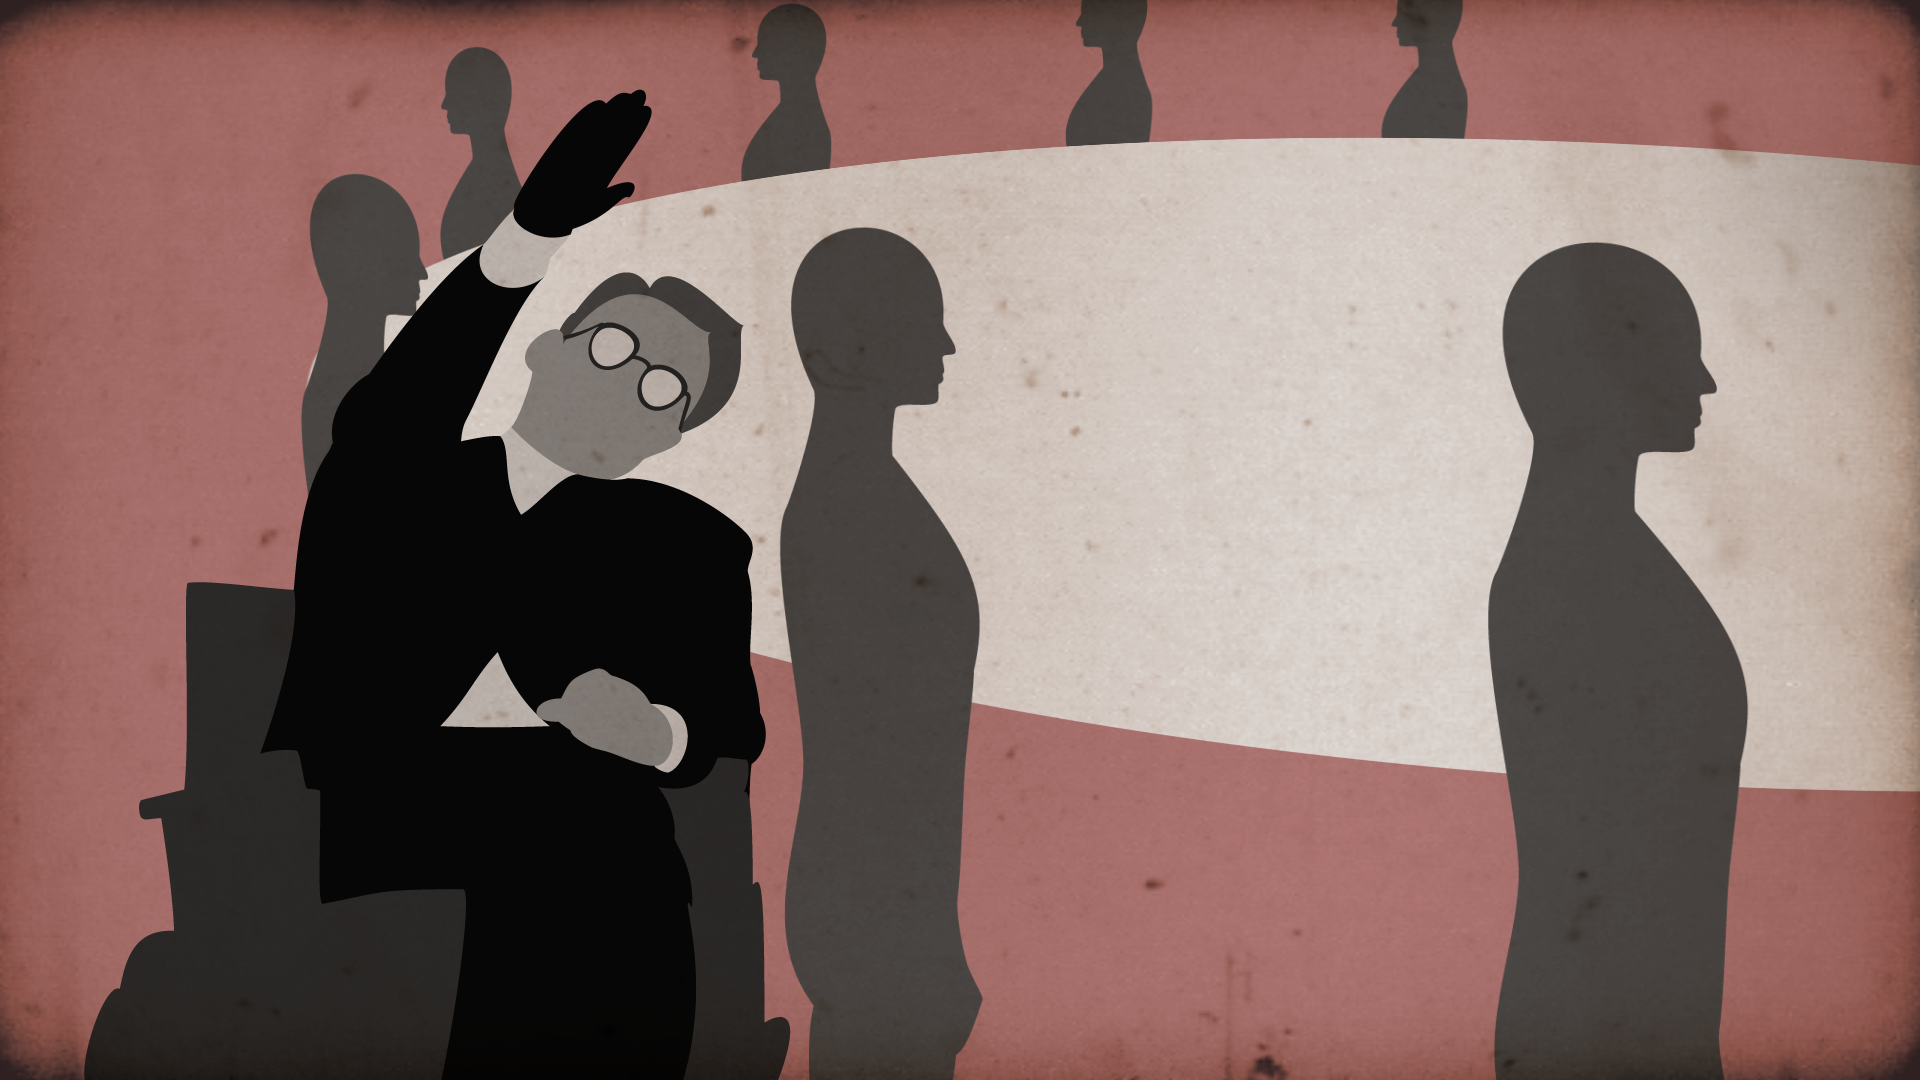 Screenshot of an animated intro to Dr. Strangelove. A man in a wheelchair wearing a suit and glasses can be seen in the front left, doing the Nazi salute. Behind him people only depicted as silhouettes begin marching around the round table. The image has a red background and some film grain on top of it.